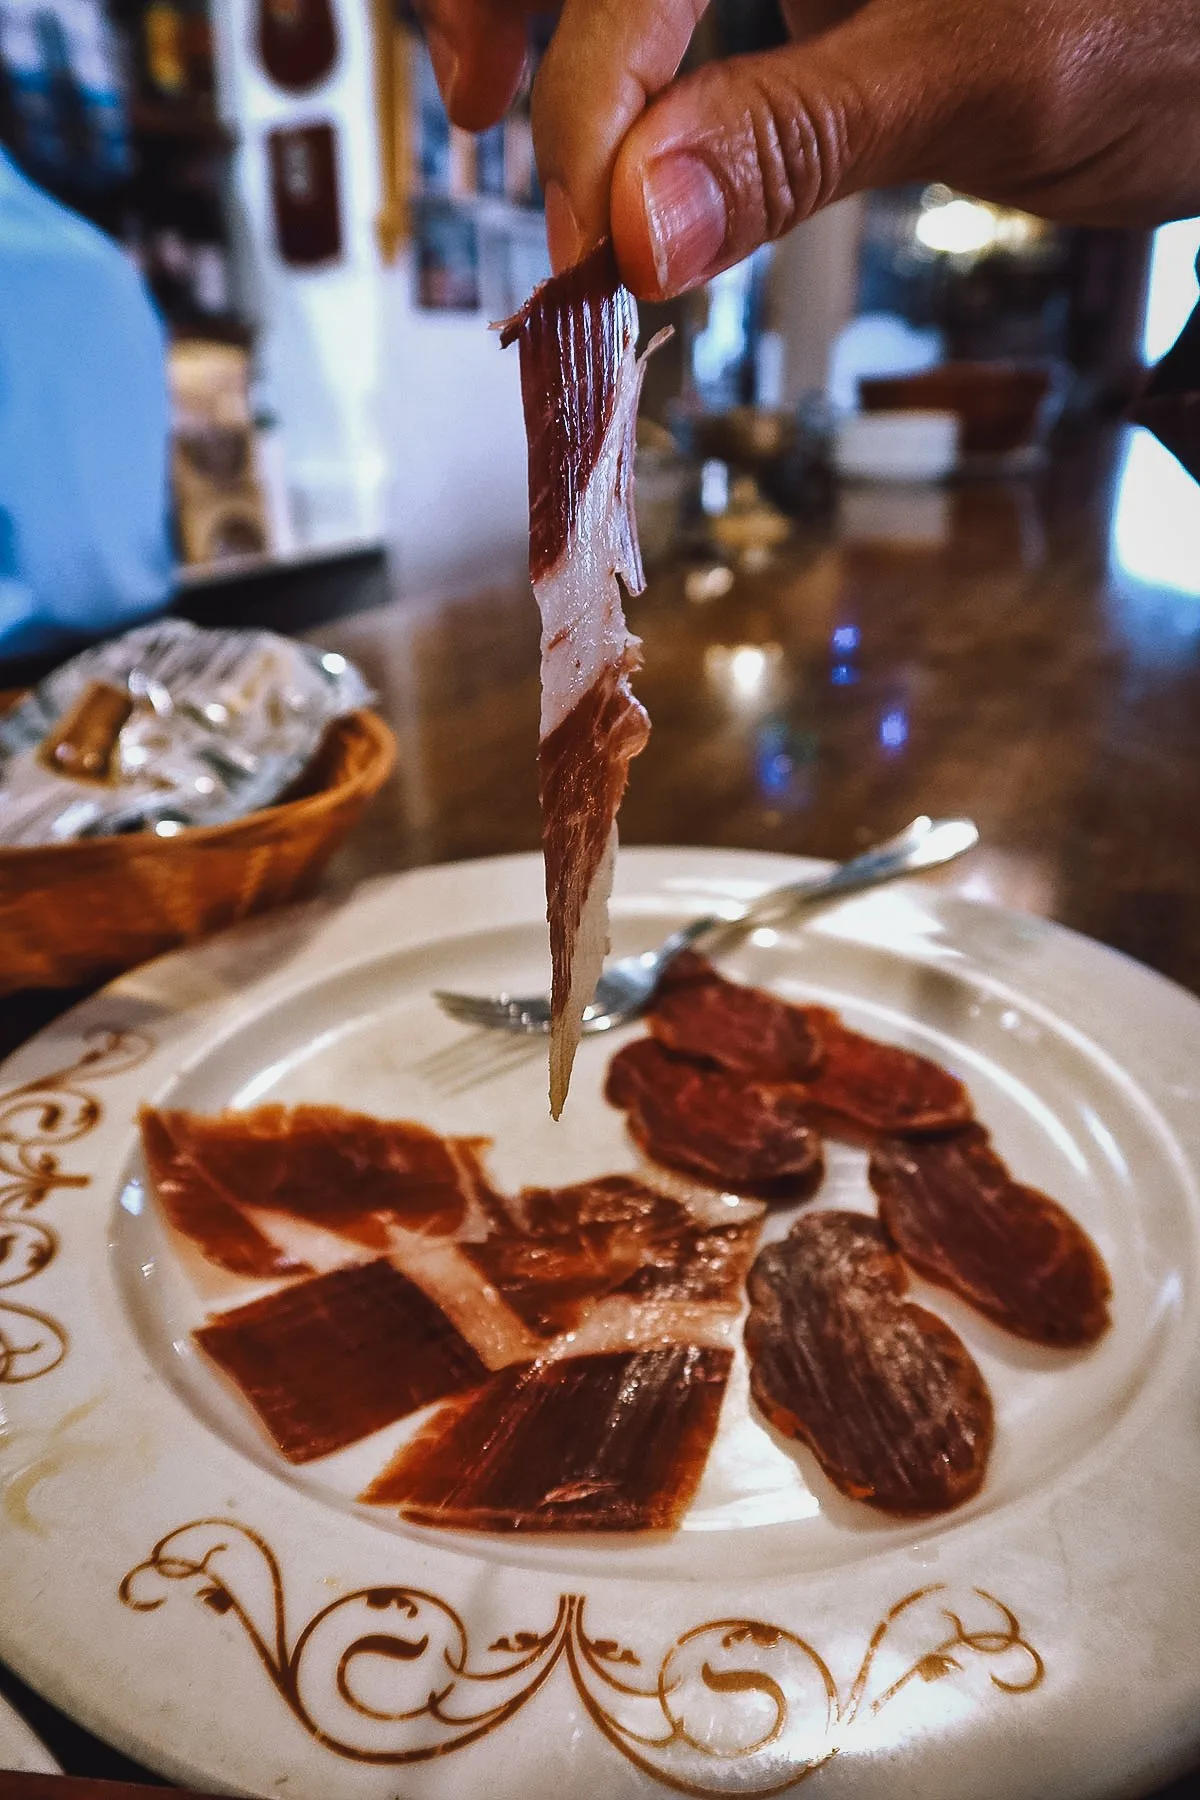 Thin slice of jamon at a restaurant in Seville